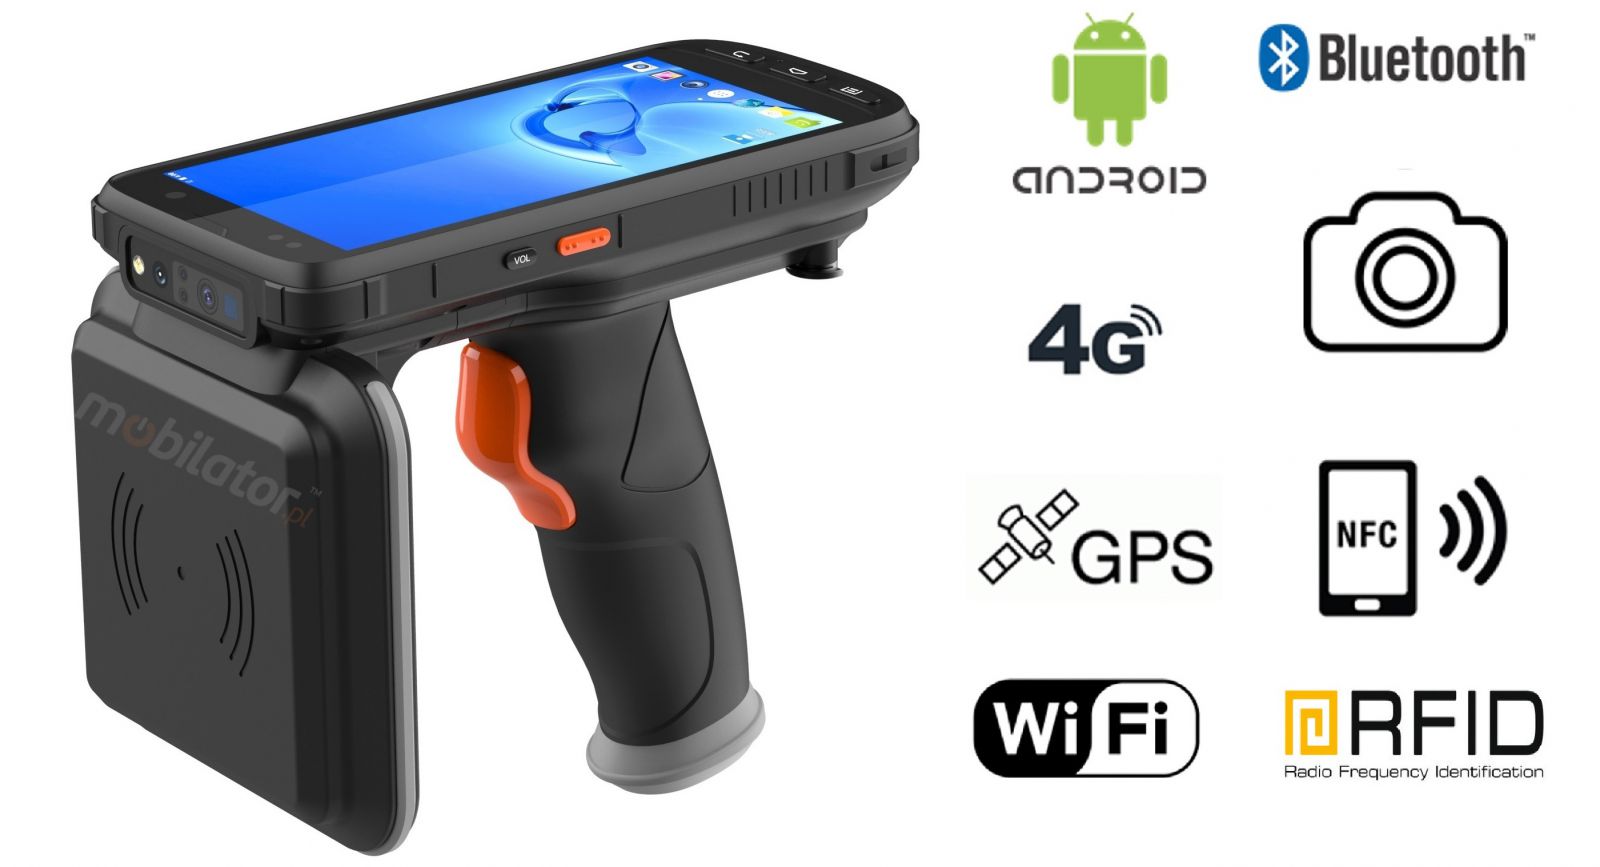 MobiPad XX-B6 v.12 - Industrial collector with IP65, NFC, 4G LTE, Bluetooth, WiFi with UHF reader (18m range) with extended memory (4GB + 64GB) + Pistol Grip 